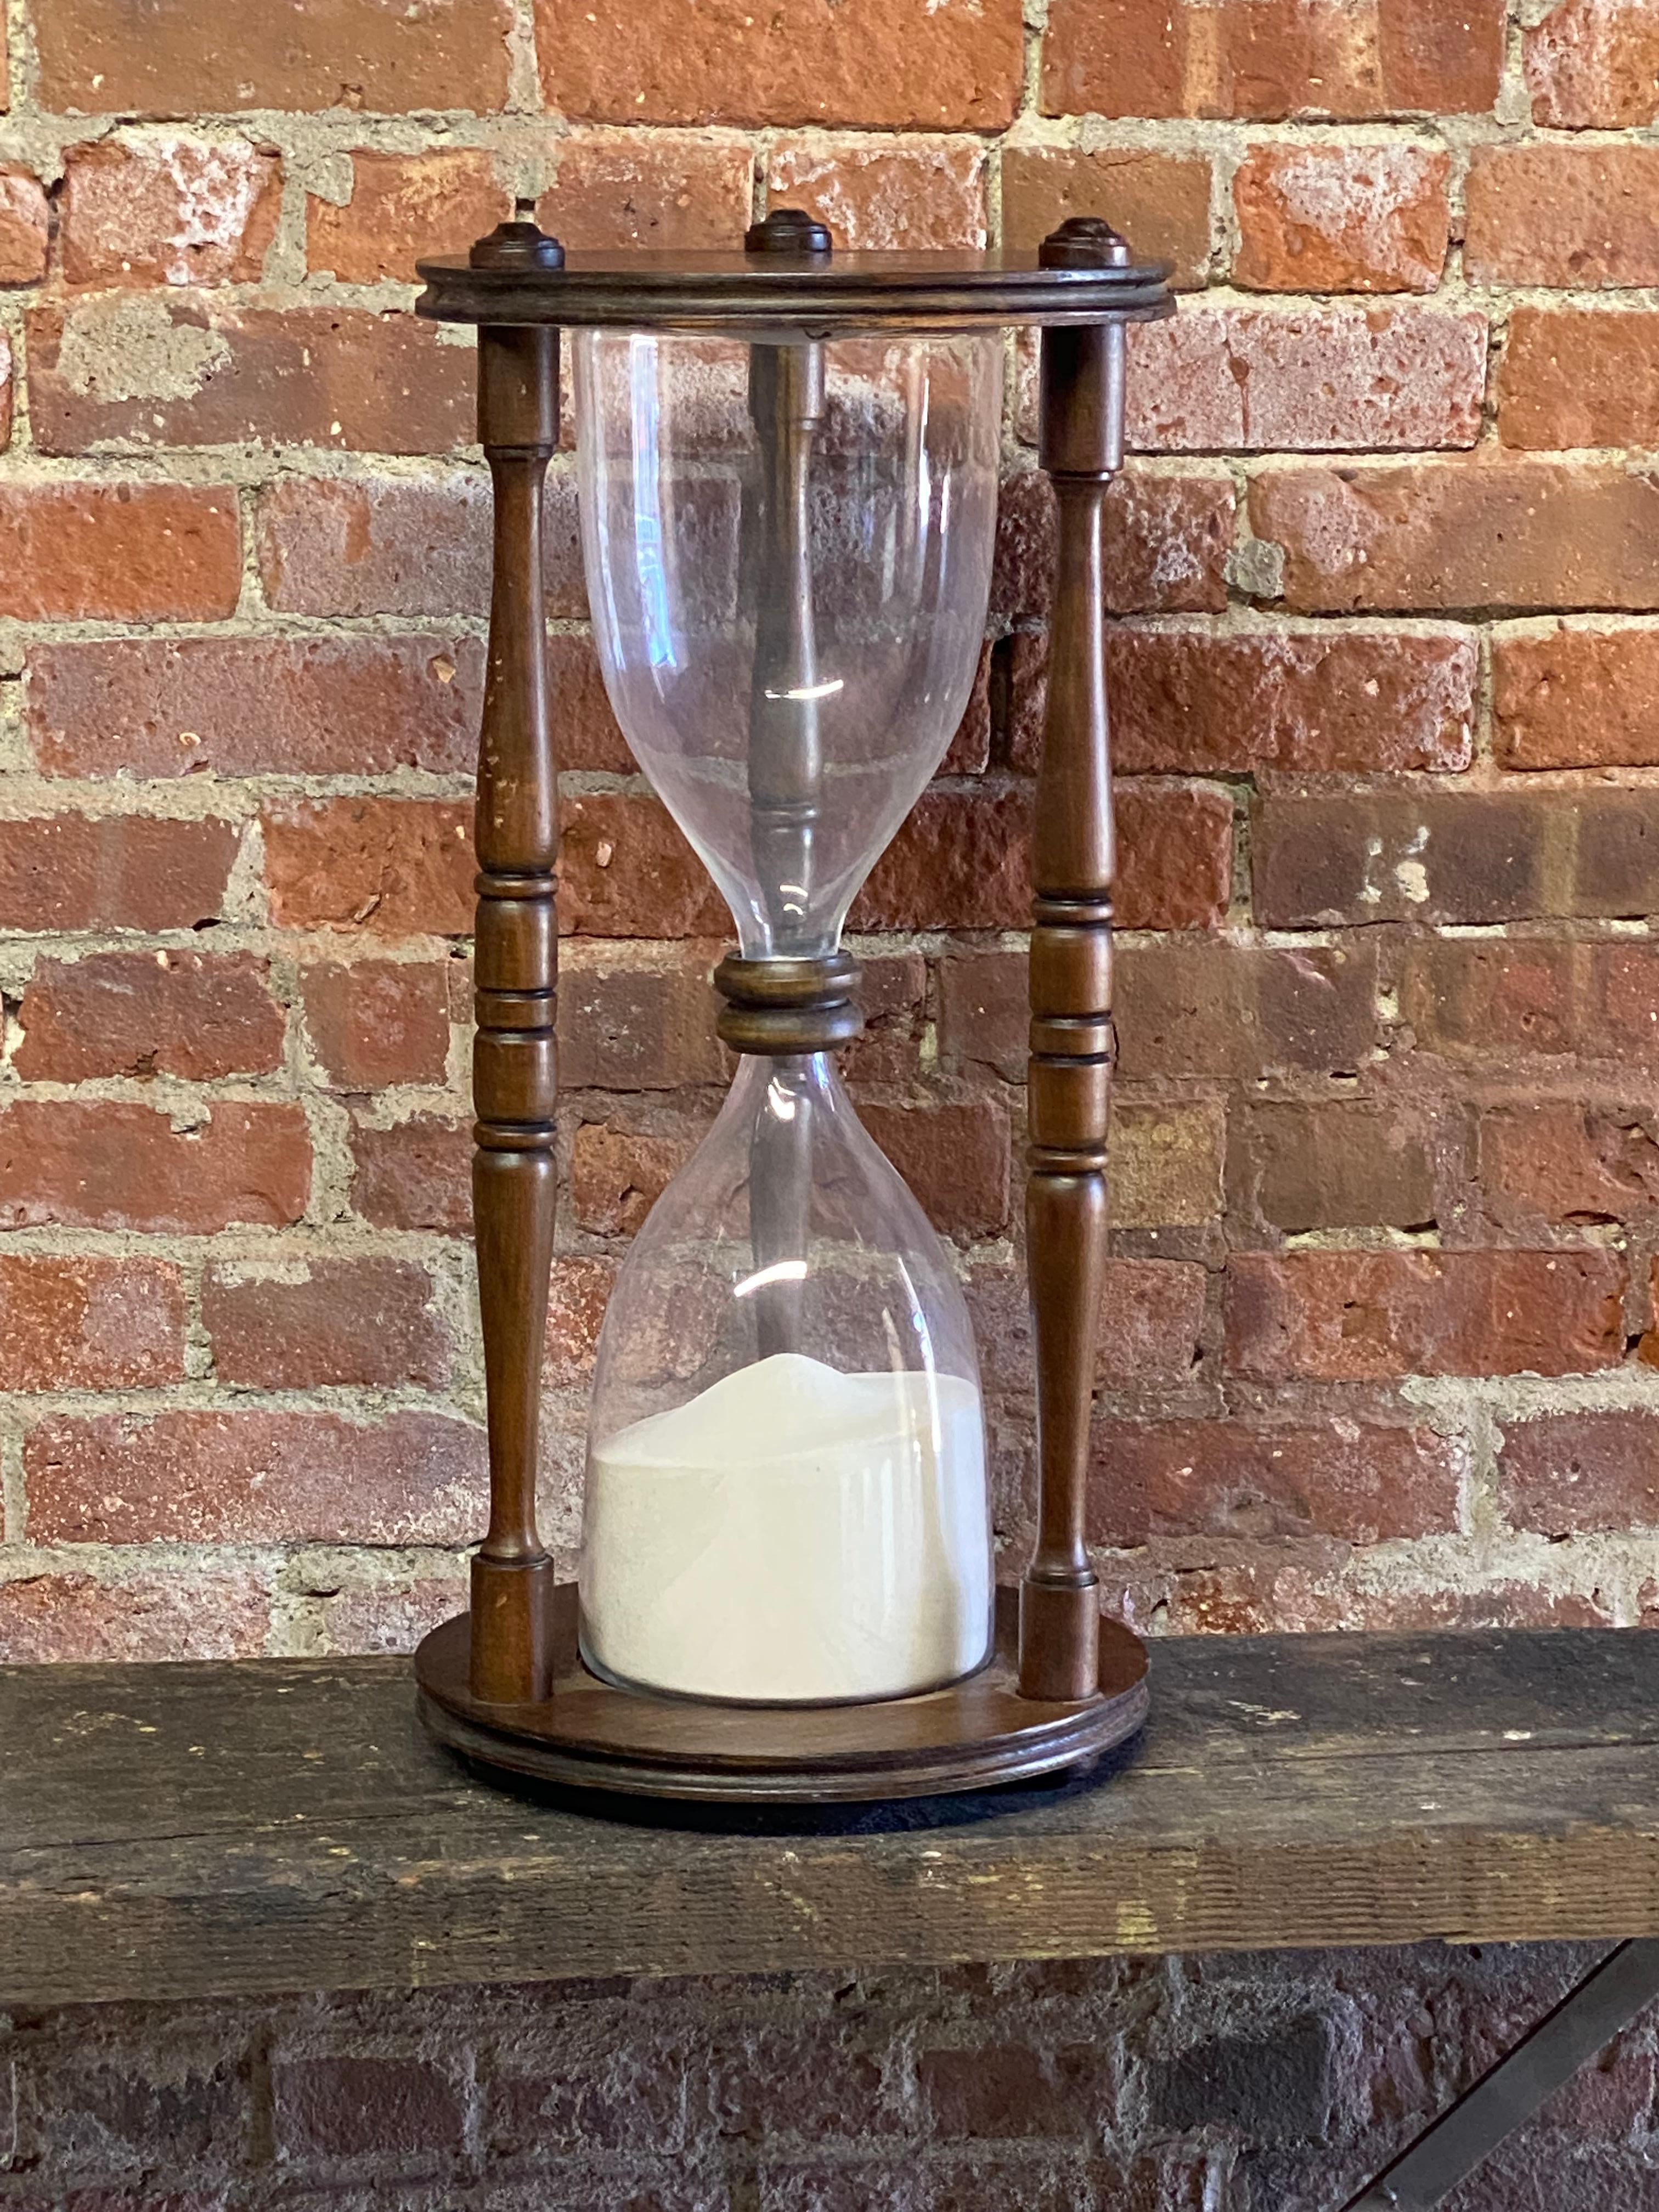 Late 20th Century oversized hourglass. Large and impressive time piece with a wood structure with a dark walnut finish and a two piece blown glass housing for the sand. The tops are sealed in rubber and have a decorative wood collar.

Good overall